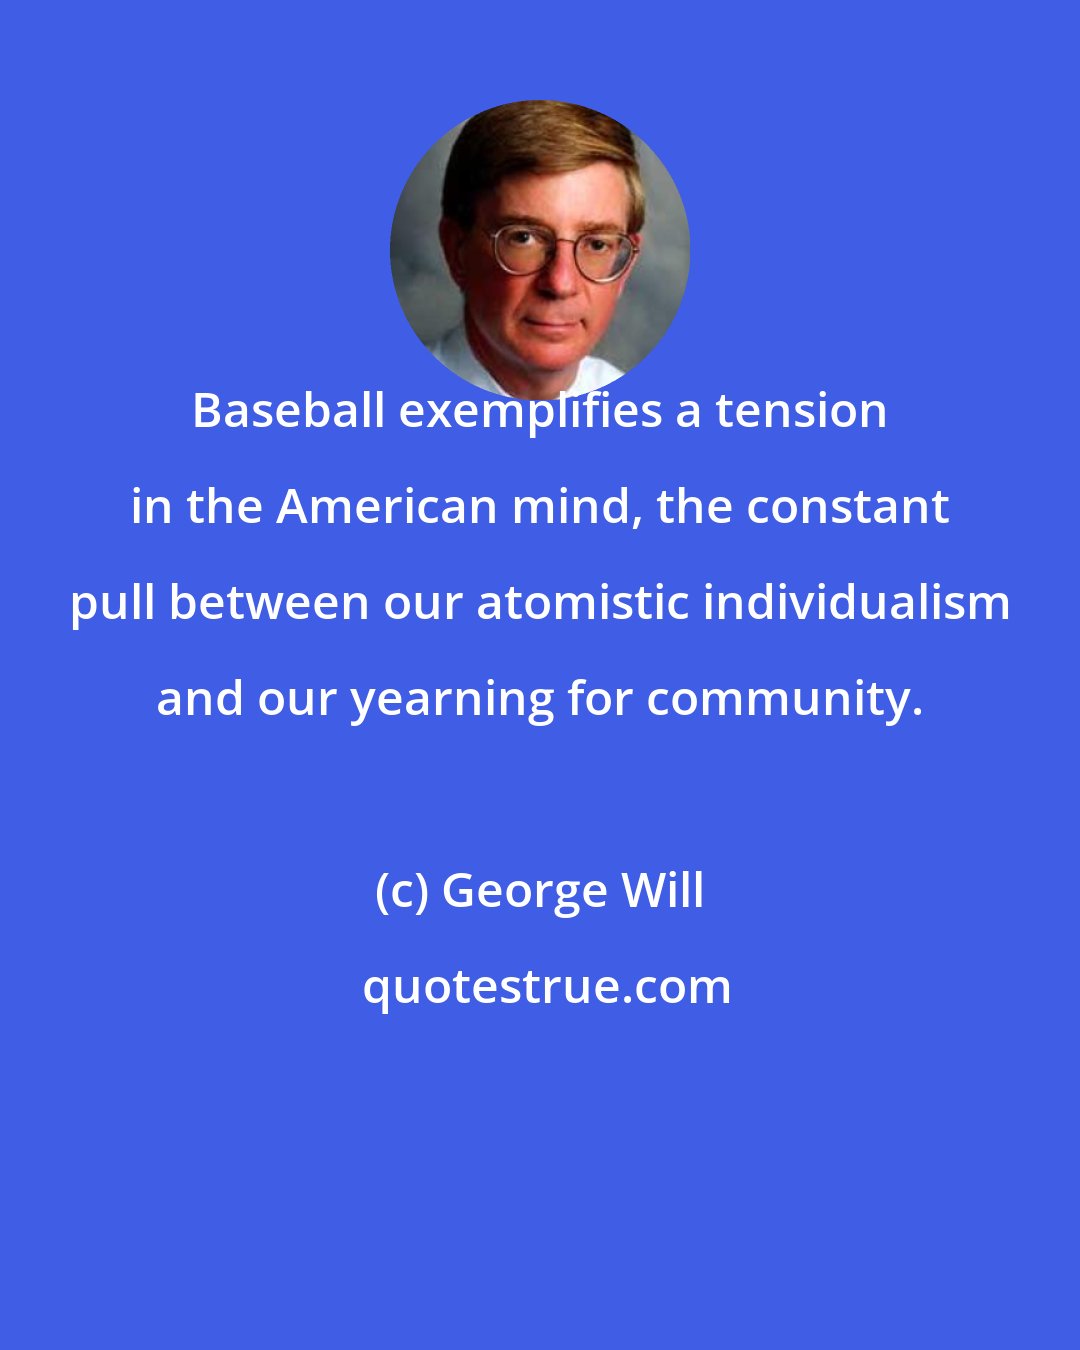 George Will: Baseball exemplifies a tension in the American mind, the constant pull between our atomistic individualism and our yearning for community.